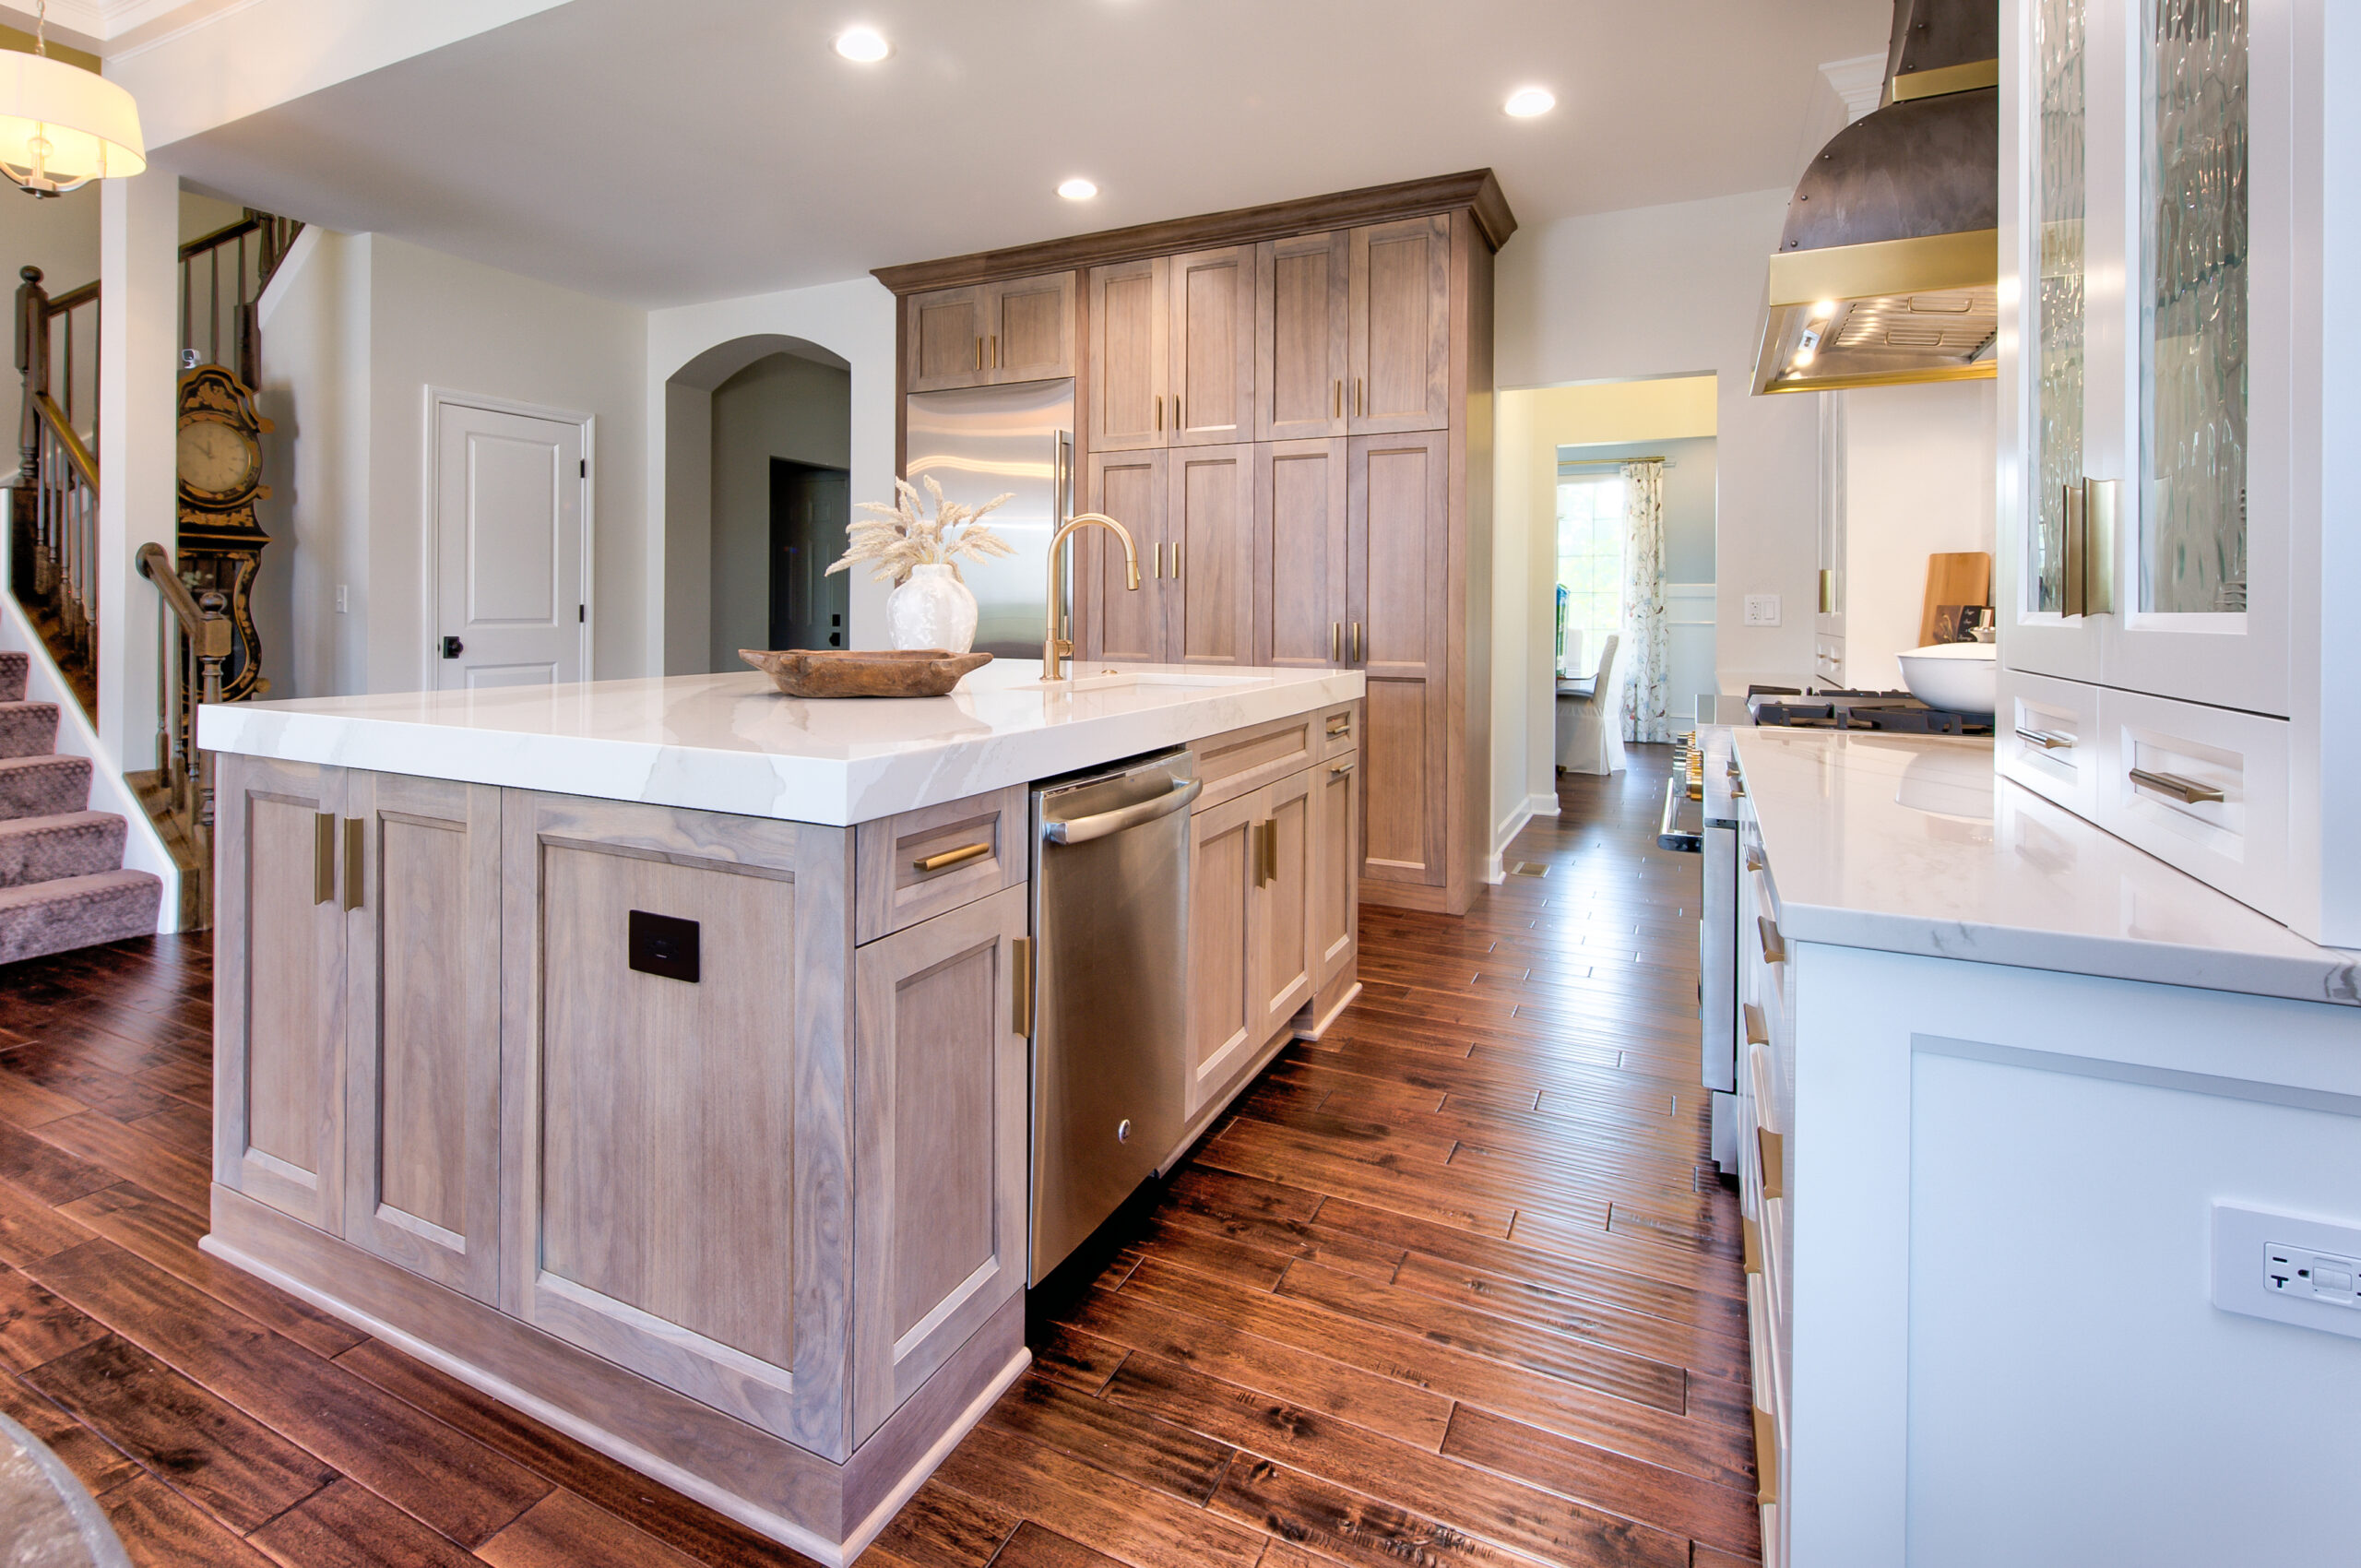 Stunning Naperville kitchen remodel with large kitchen island 